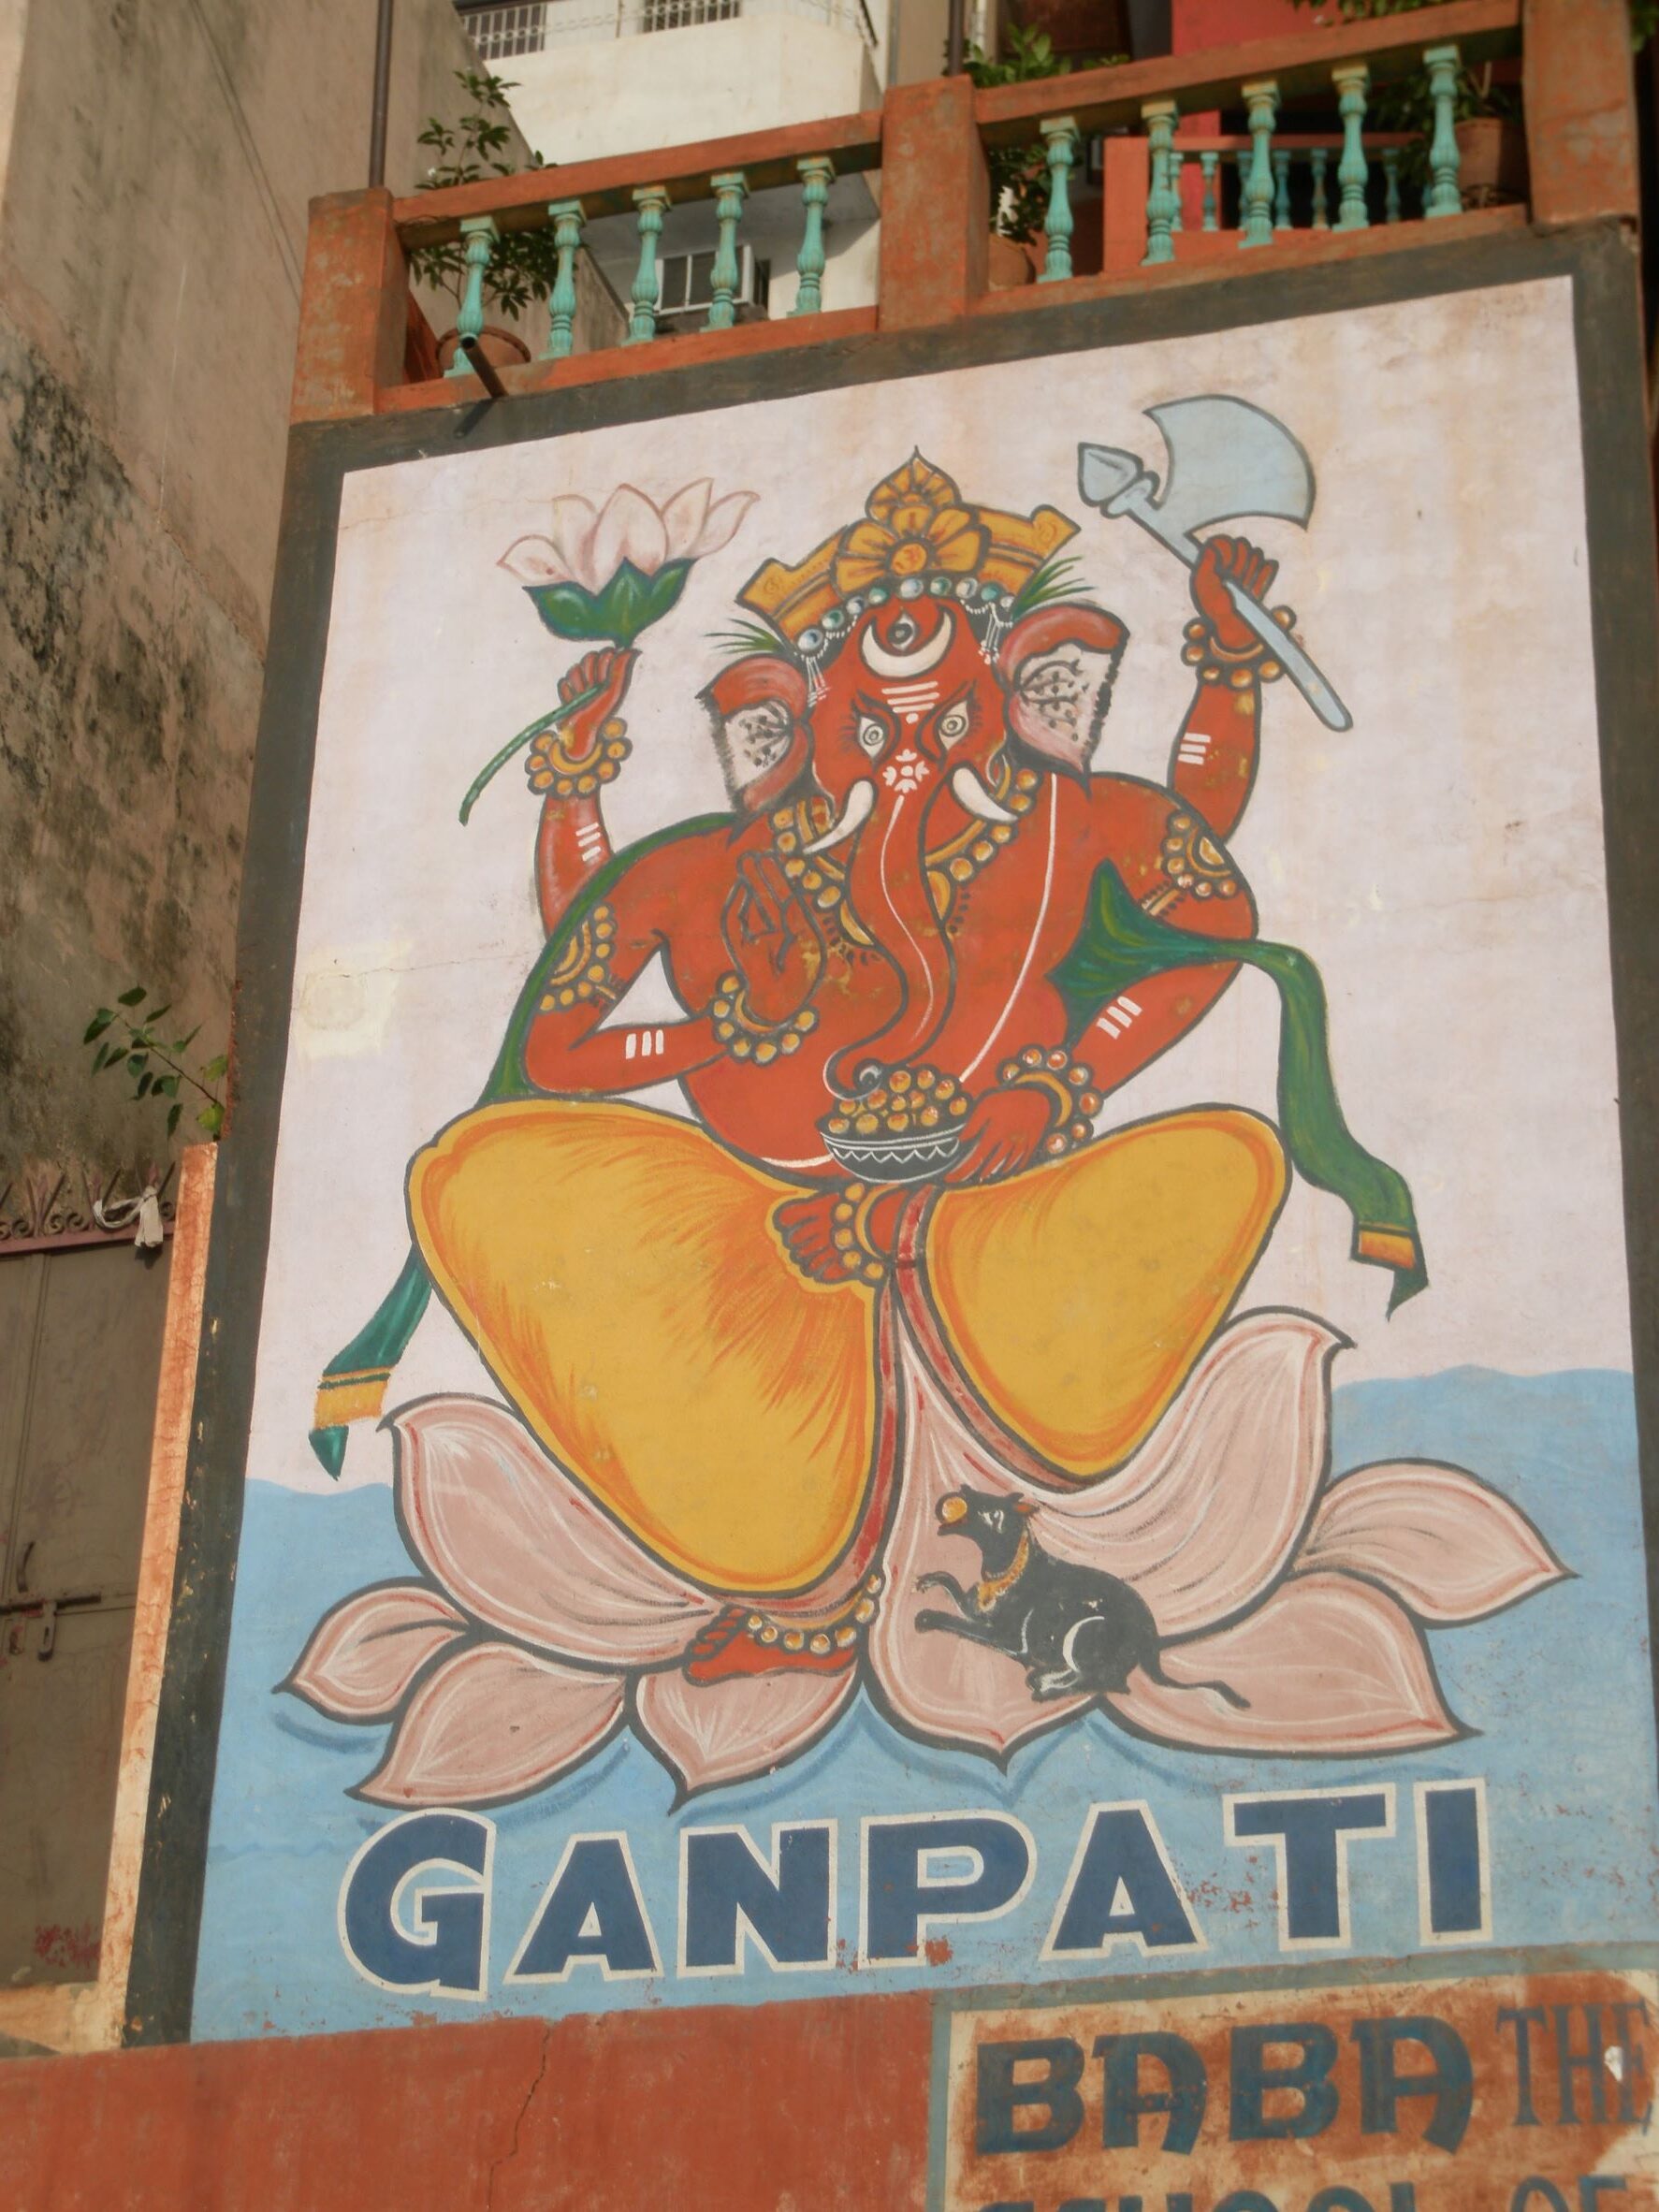 Ganpati Guesthouse mural painted on a wall with a red Ganesha, Varanasi, India